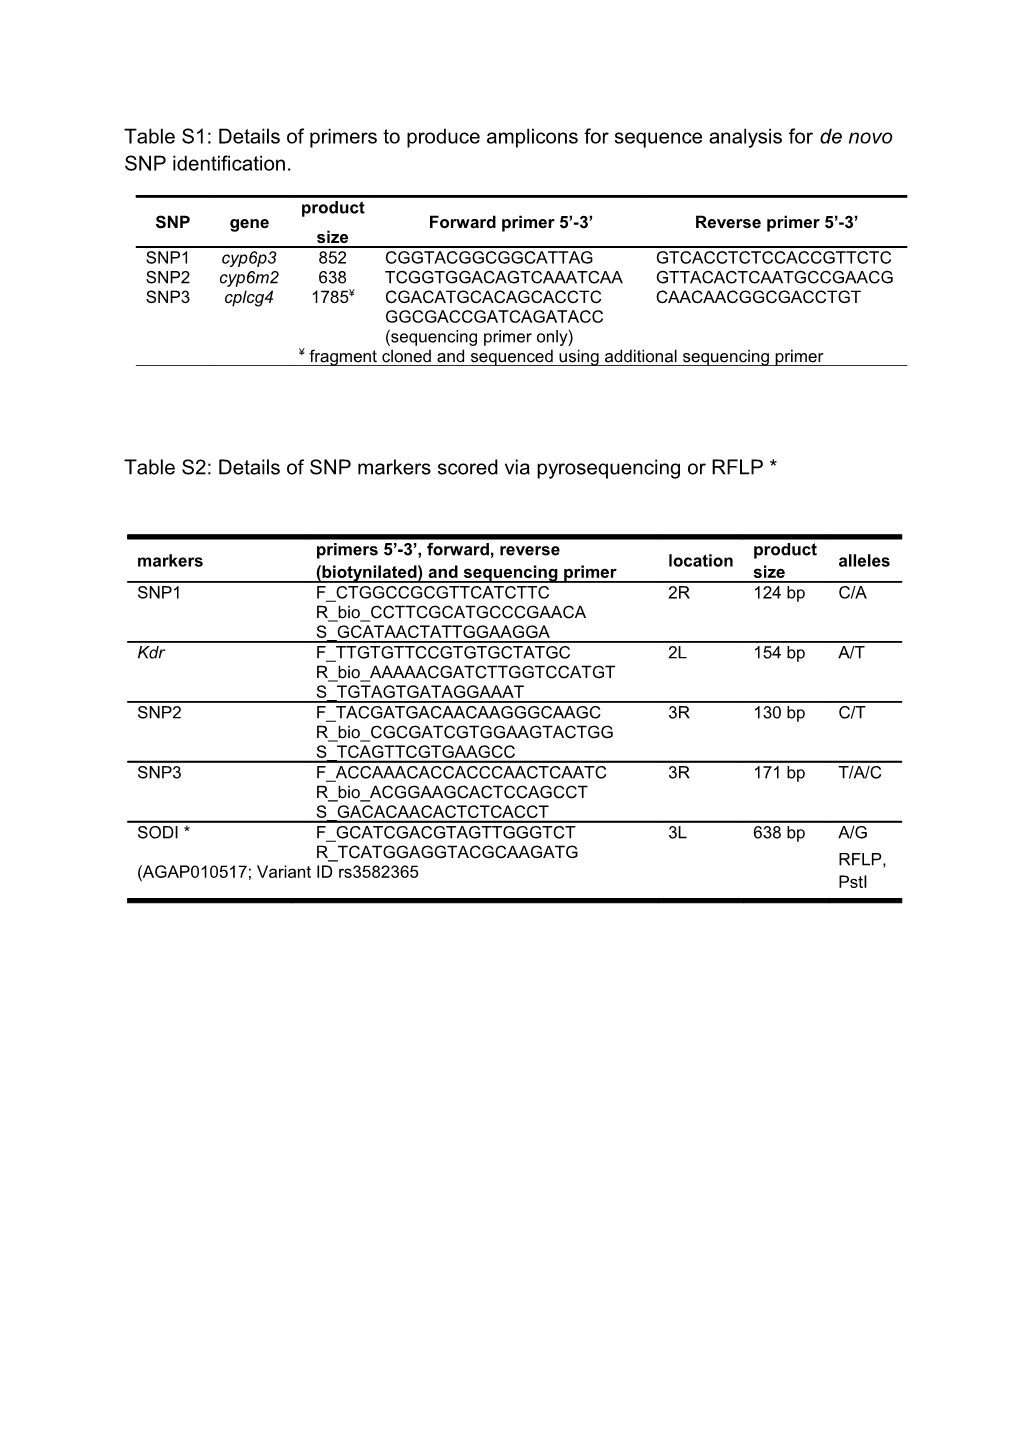 Table S2: Details of SNP Markers Scored Via Pyrosequencing Or RFLP *